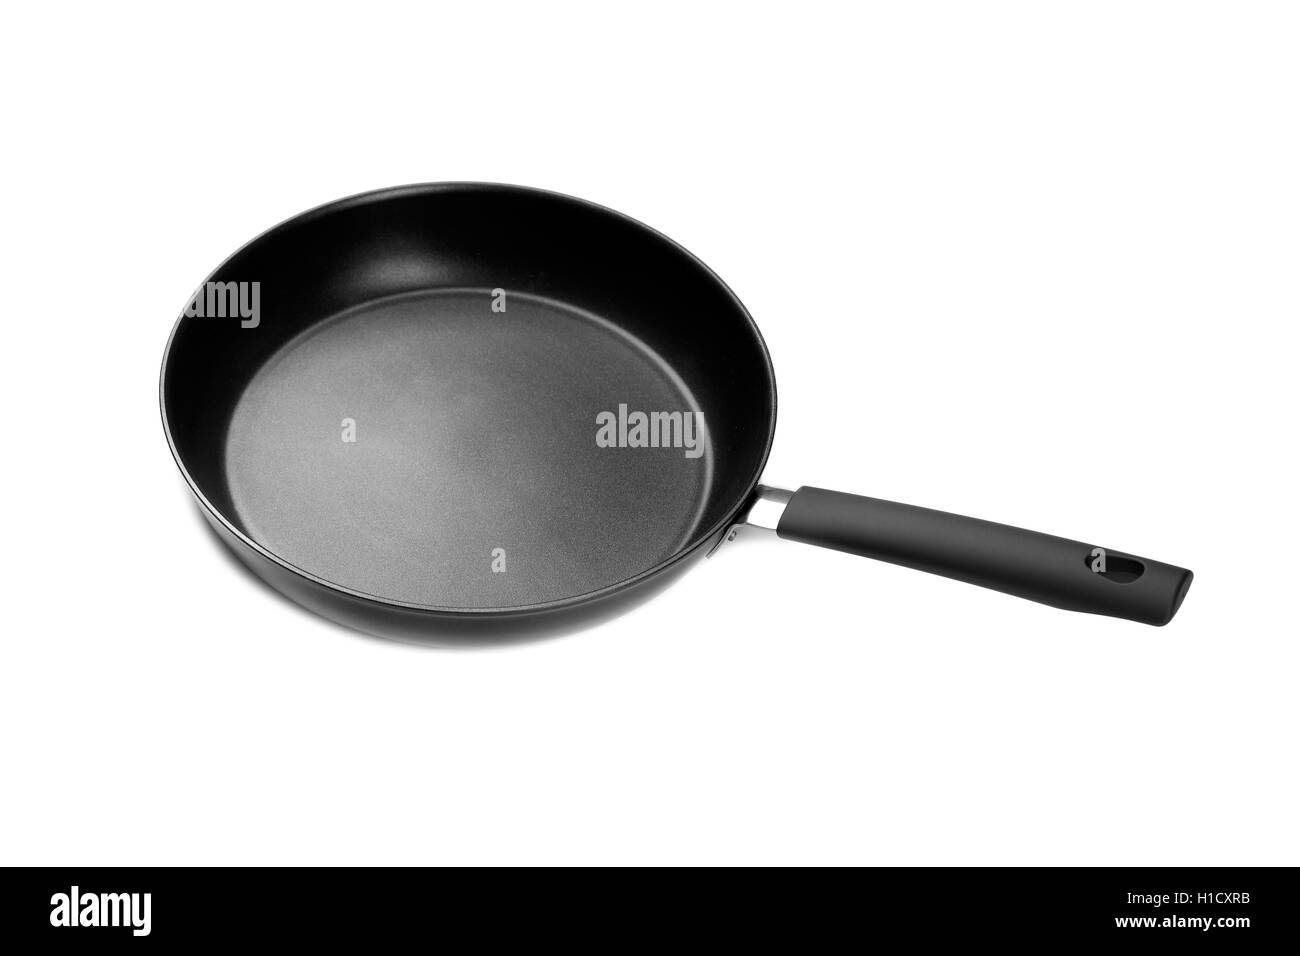 https://c8.alamy.com/comp/H1CXRB/modern-pan-with-non-stick-coating-isolate-on-white-H1CXRB.jpg